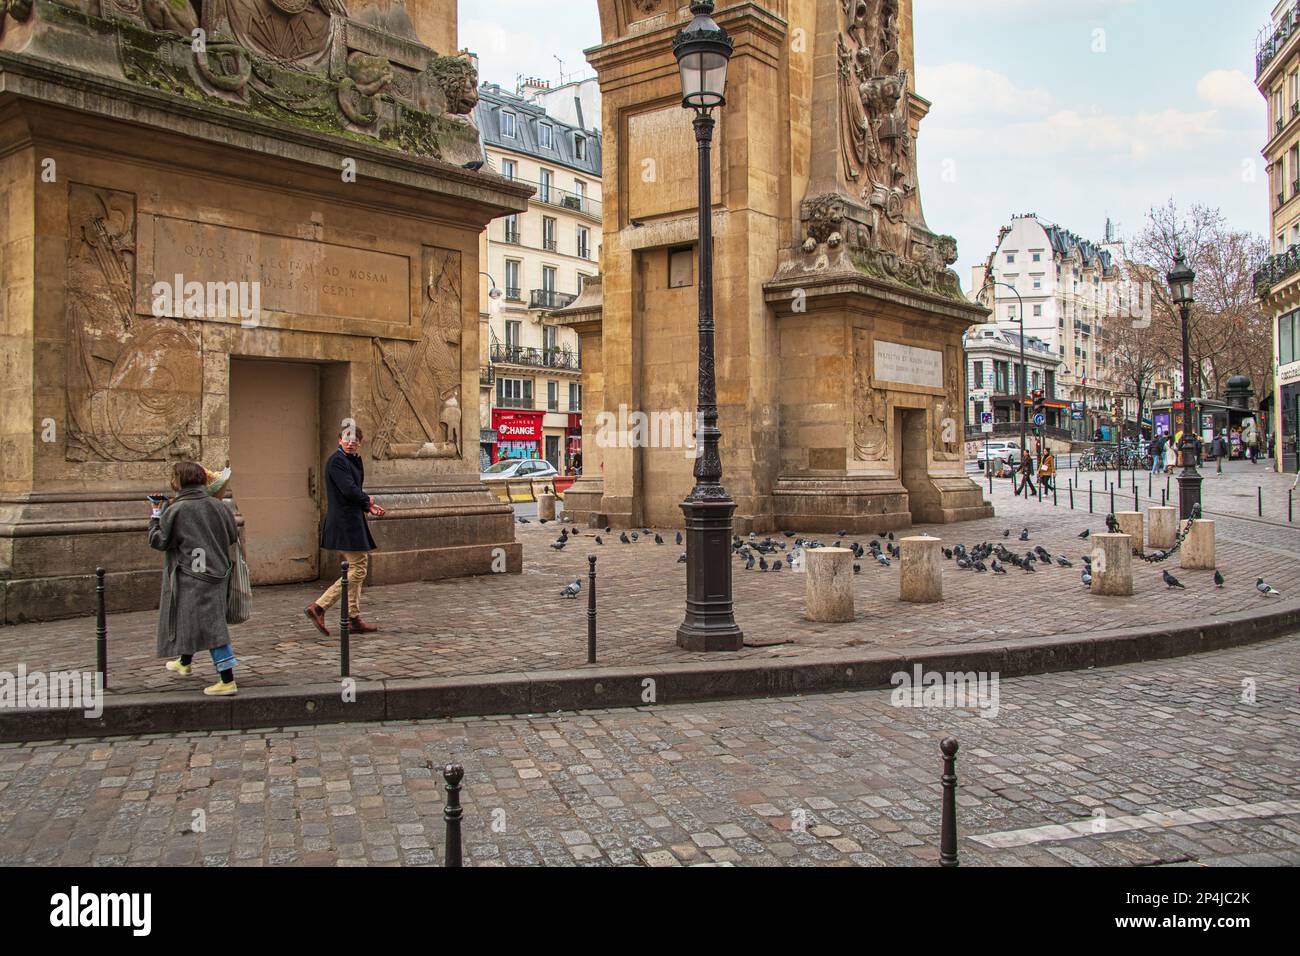 A Man turns to look at a passing women underneath the Porte Saint-Denis in Paris. Stock Photo